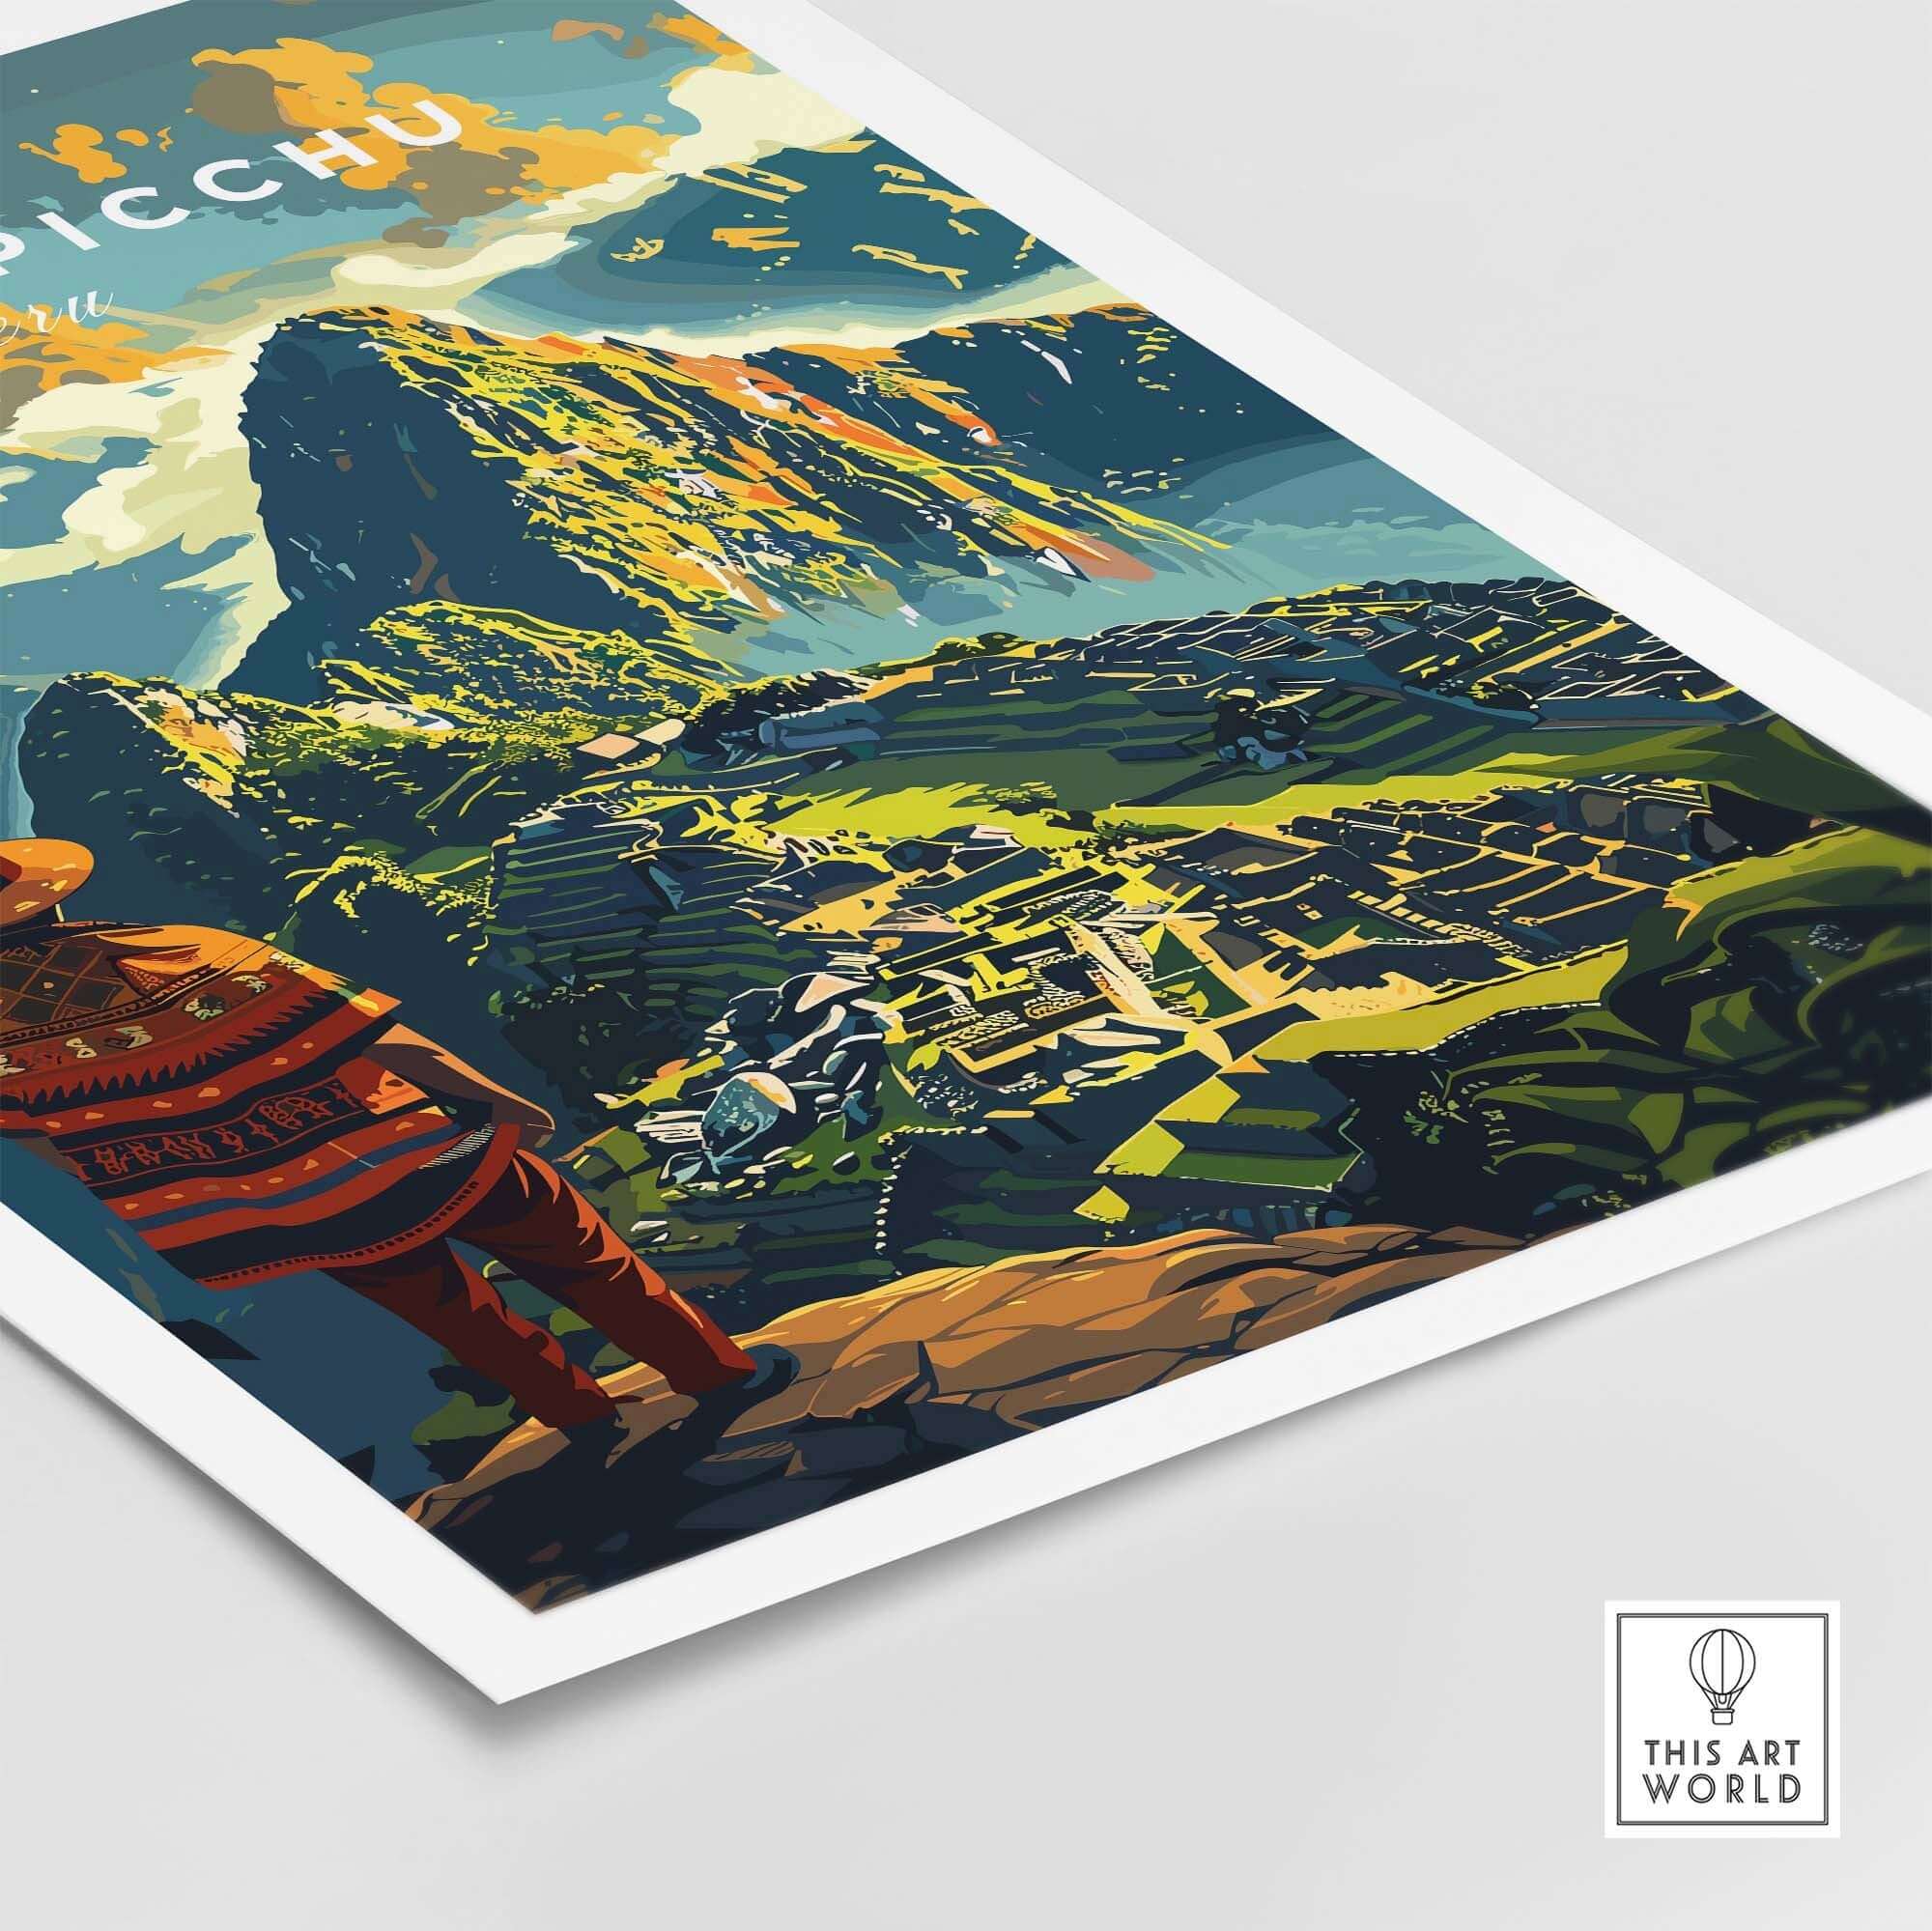 Machu Picchu Poster view our best collection or travel posters and prints - ThisArtWorld